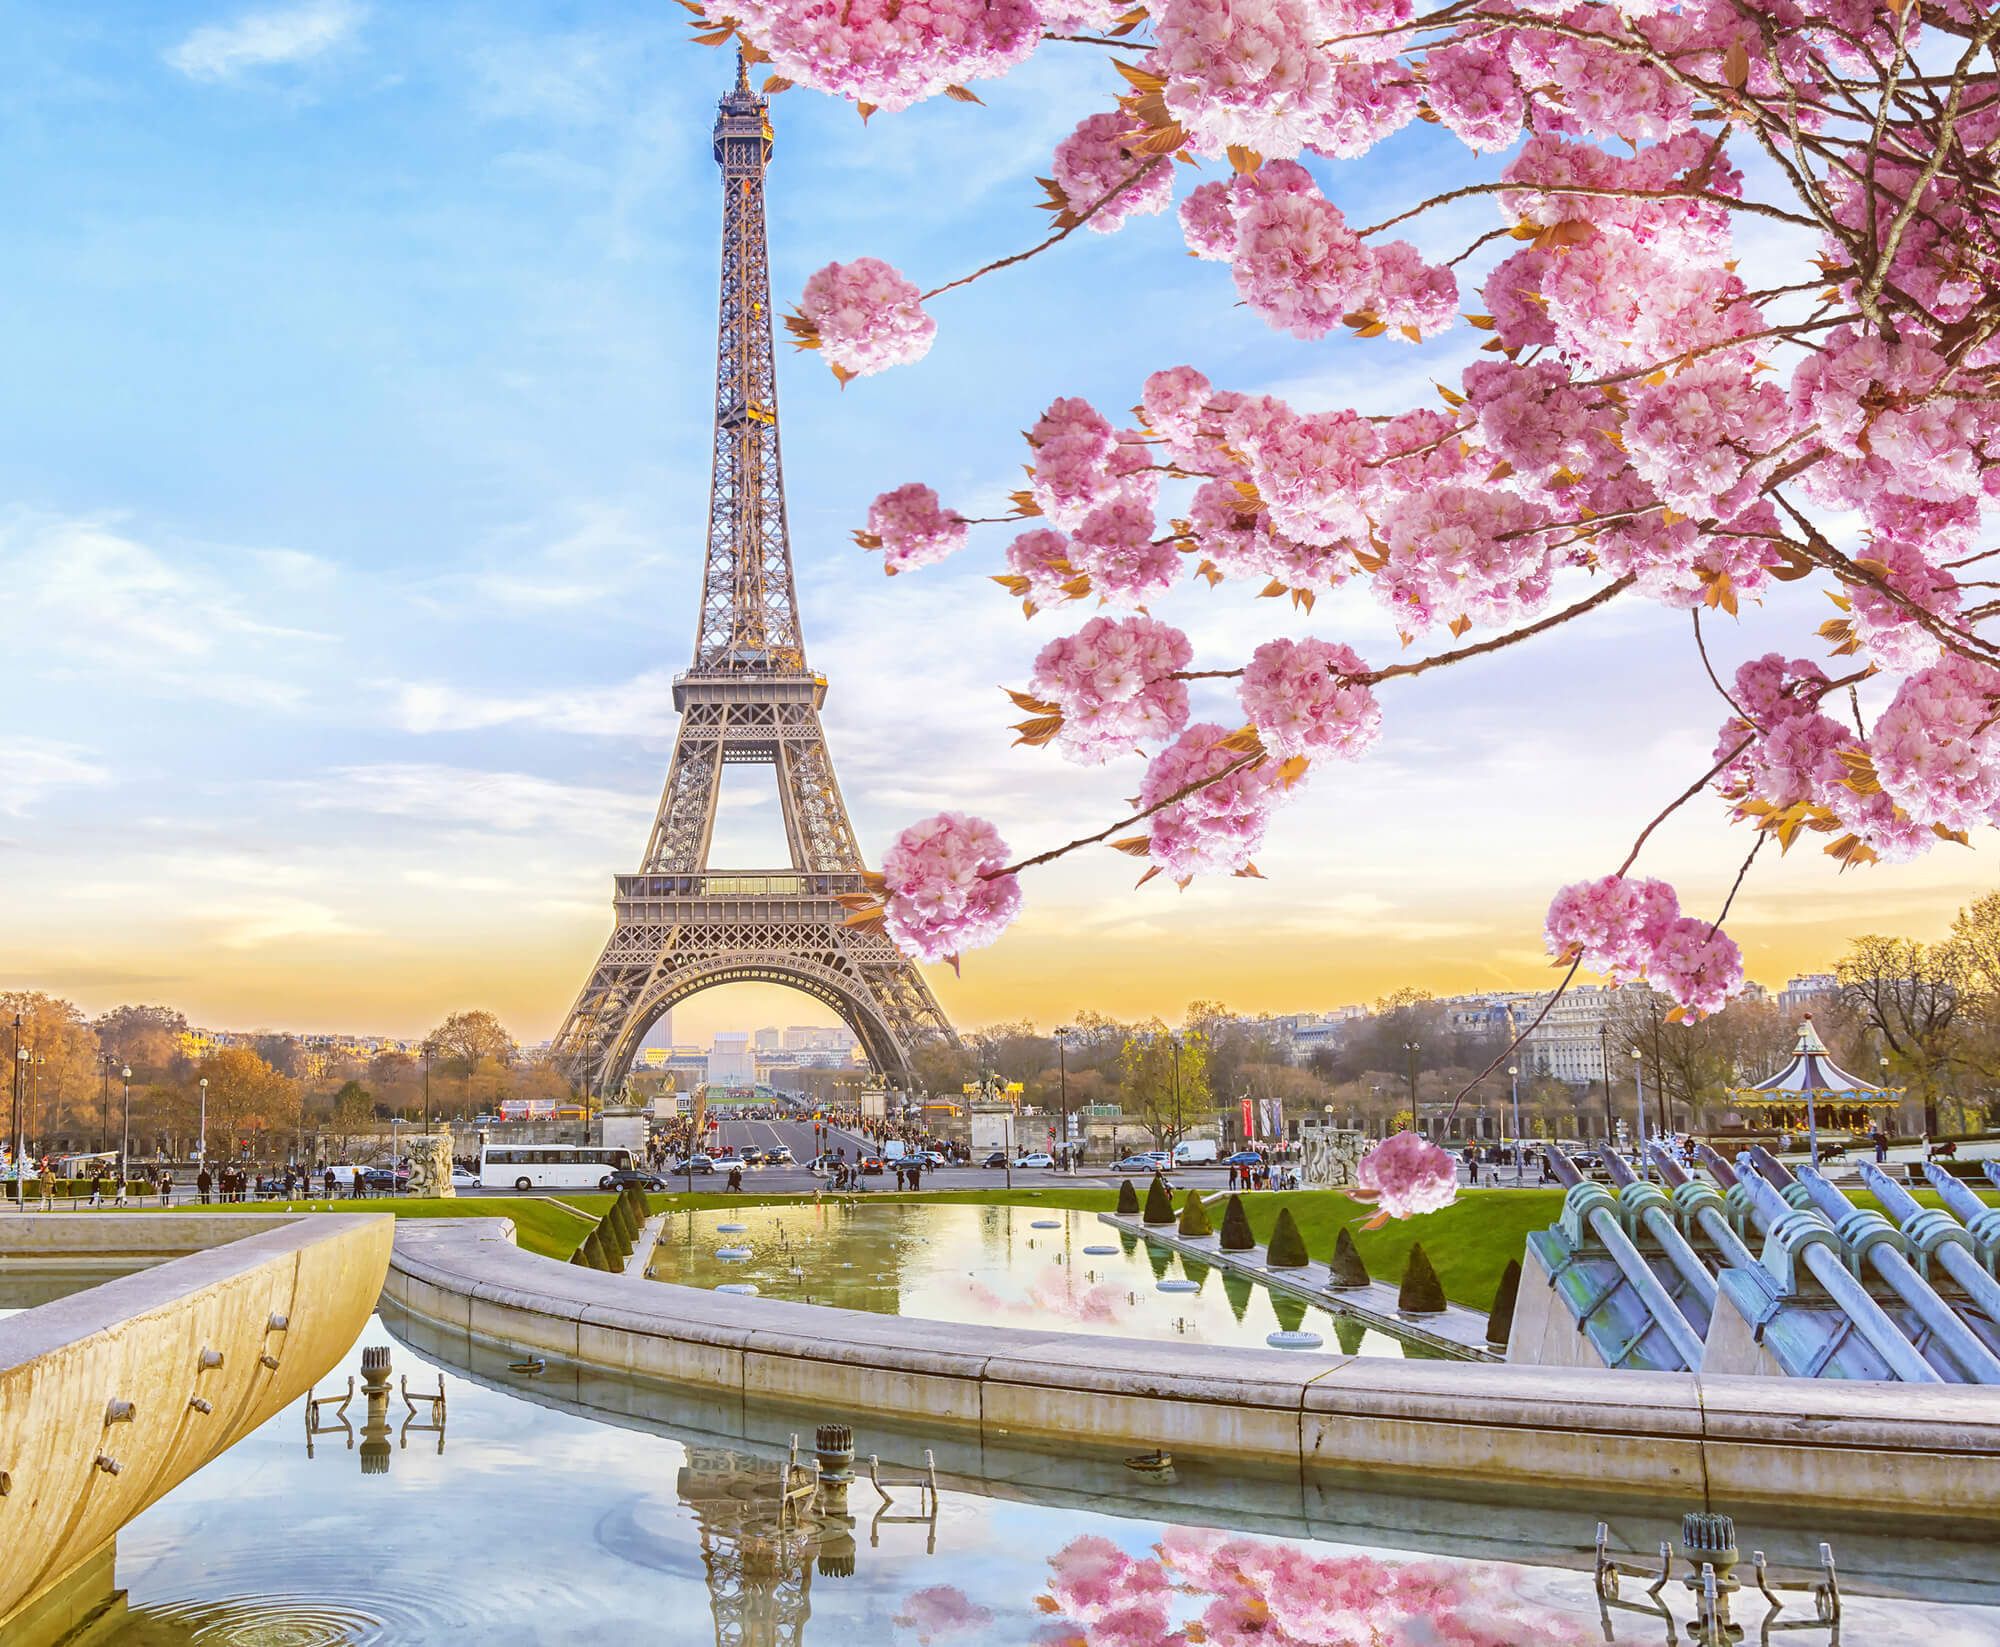 Download Cute Background Eiffel Tower Wallpaper | Wallpapers.com